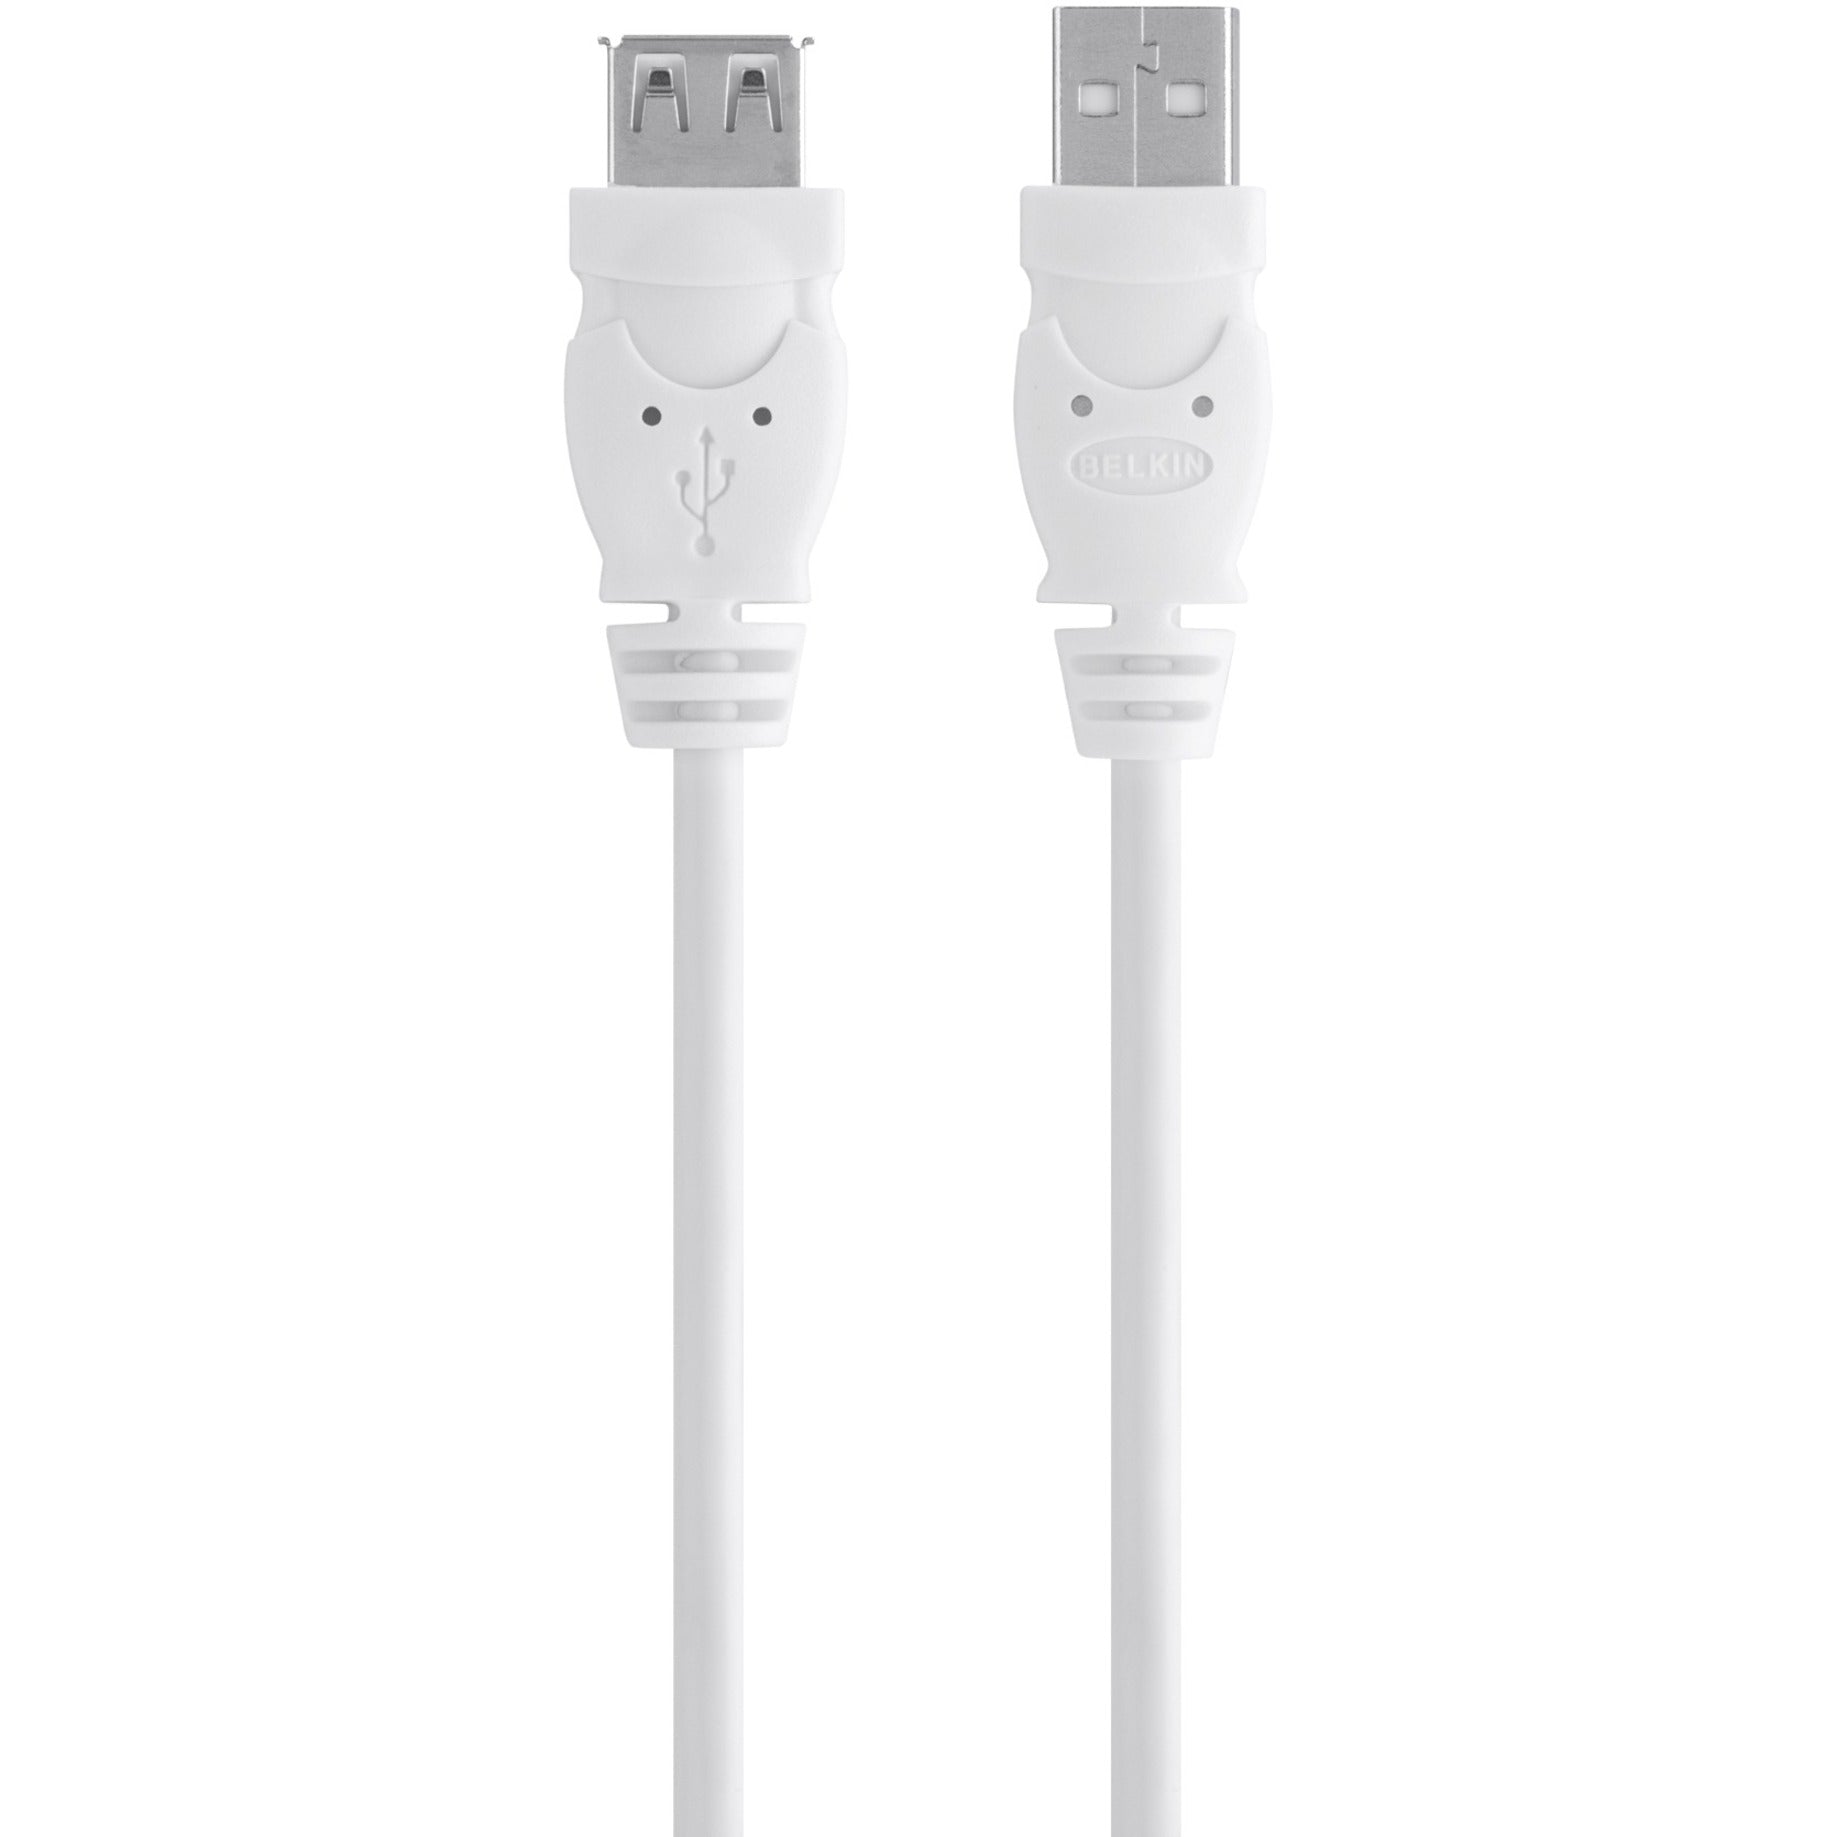 Belkin F3U153bt3M USB Extension Data Transfer Cable, 9.84 ft, White